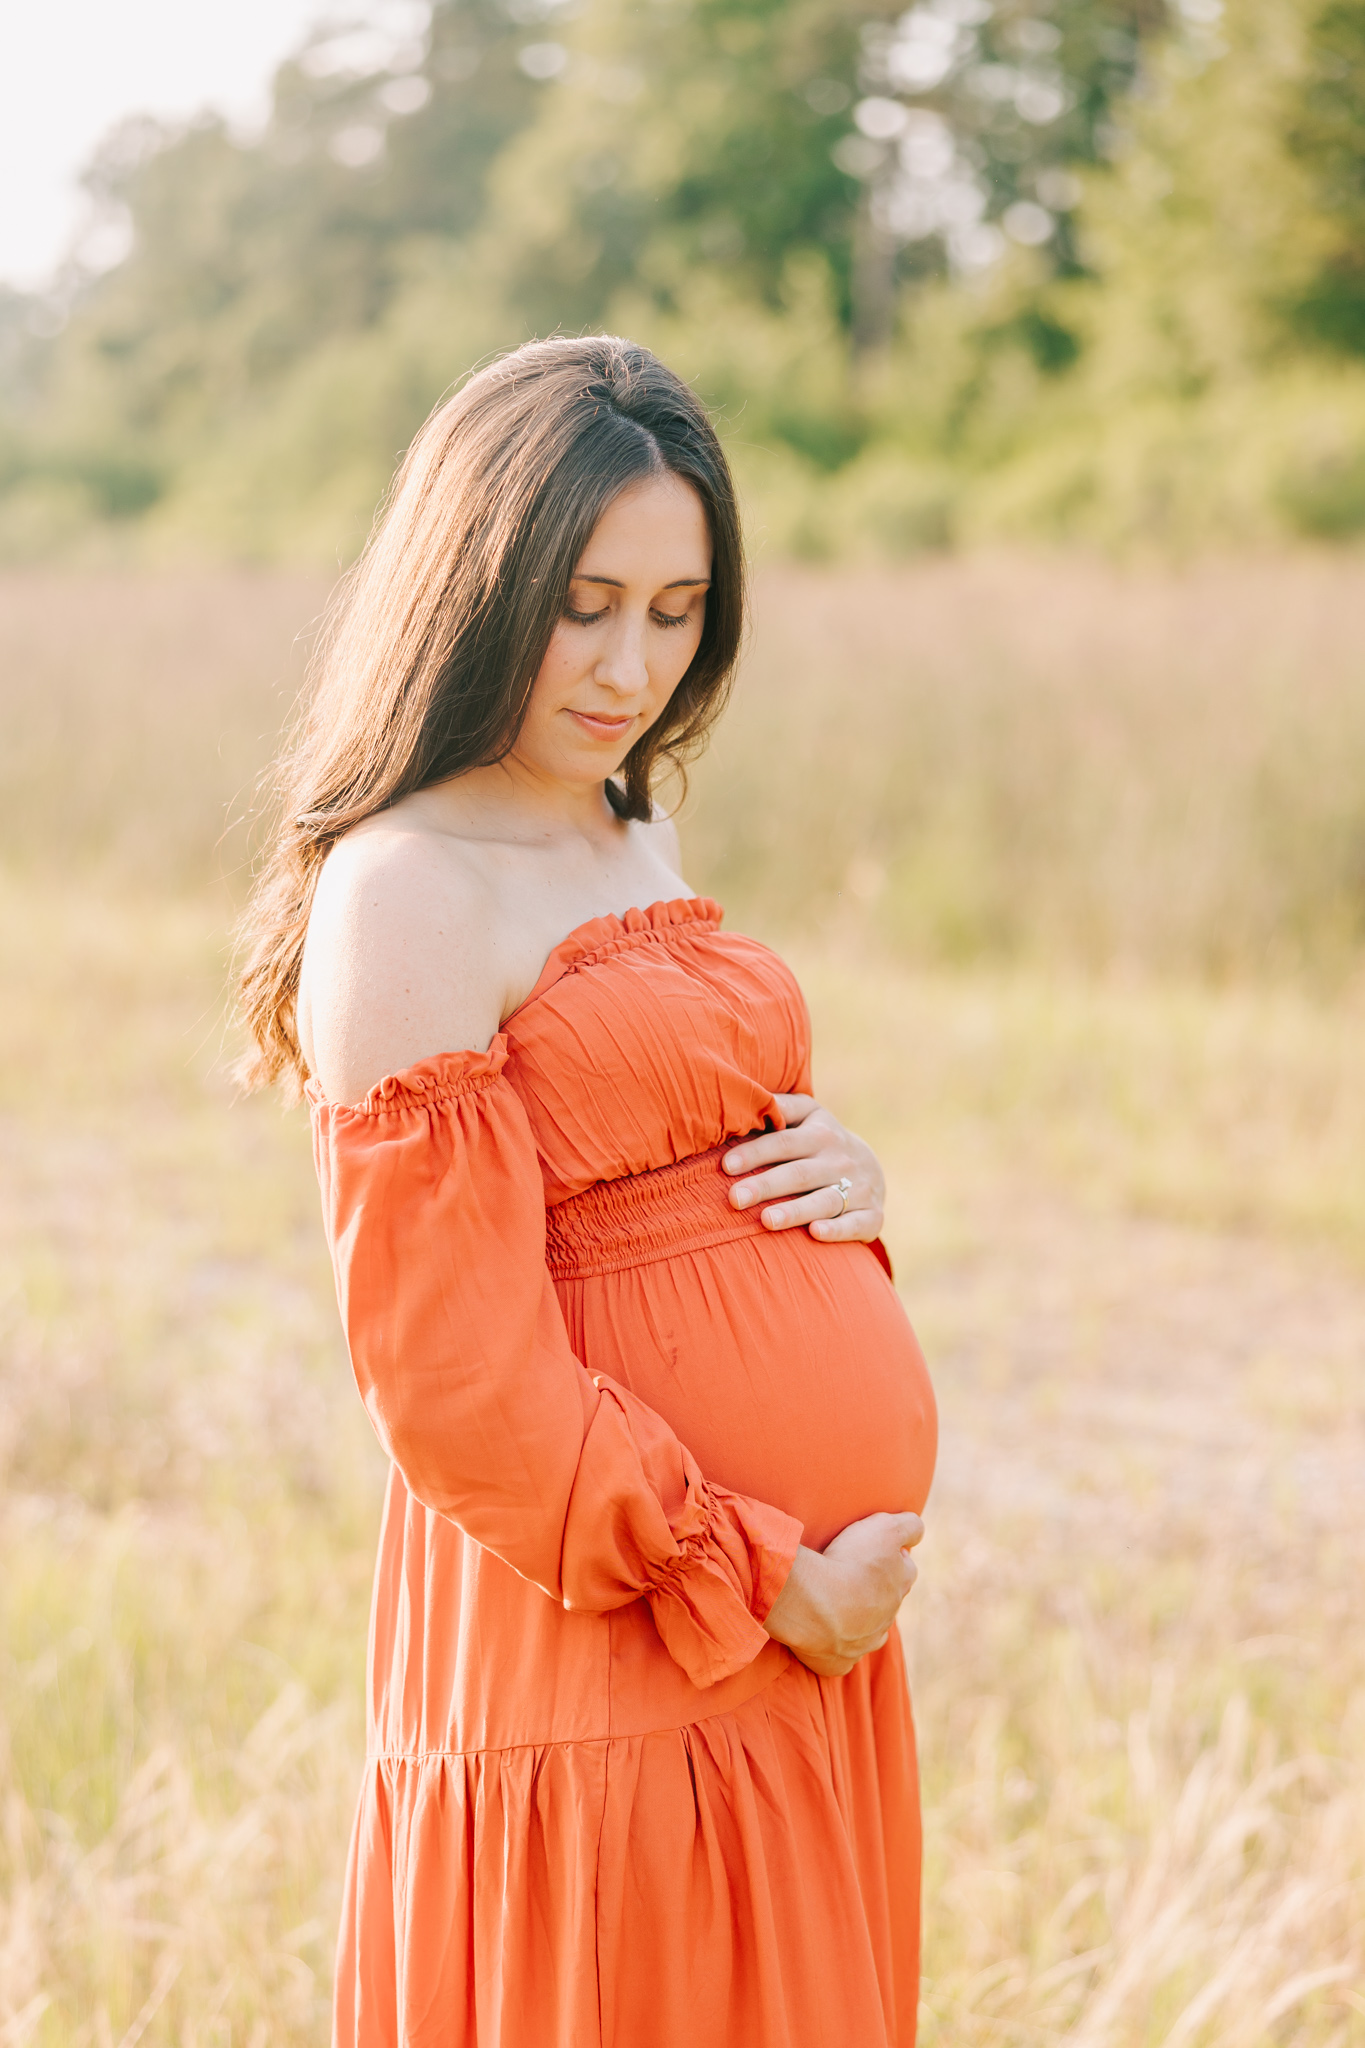 Expecting mom capturing maternity portraits before her last baby arrives soon.